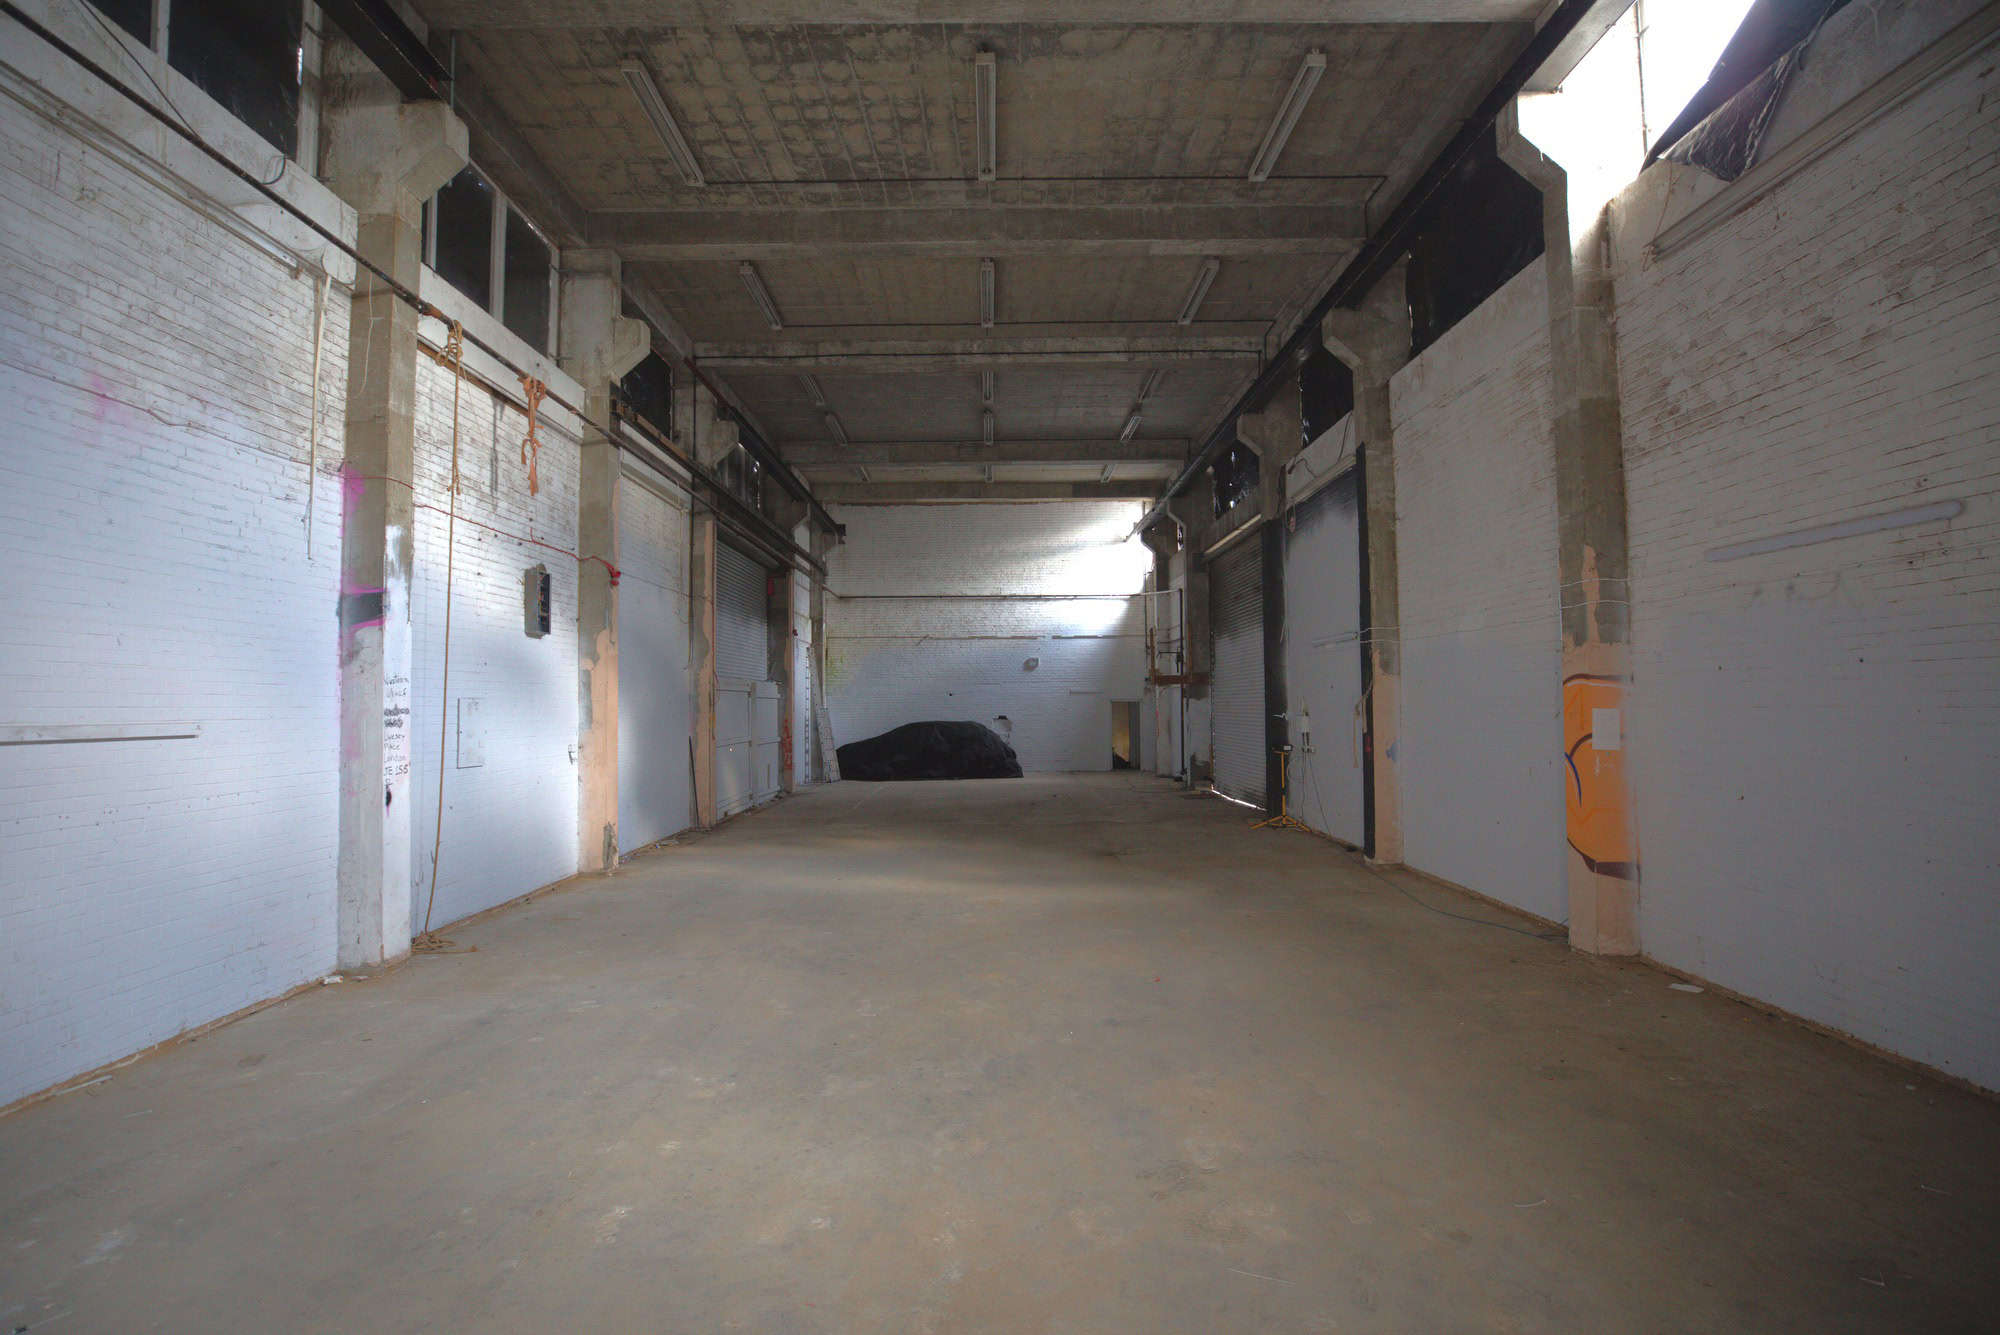 The Place SE15 - A versatile warehouse building and blank canvas events space with on site parking and drive-in capabilities. Available for events, photoshoot hire and filming - The Location Guys